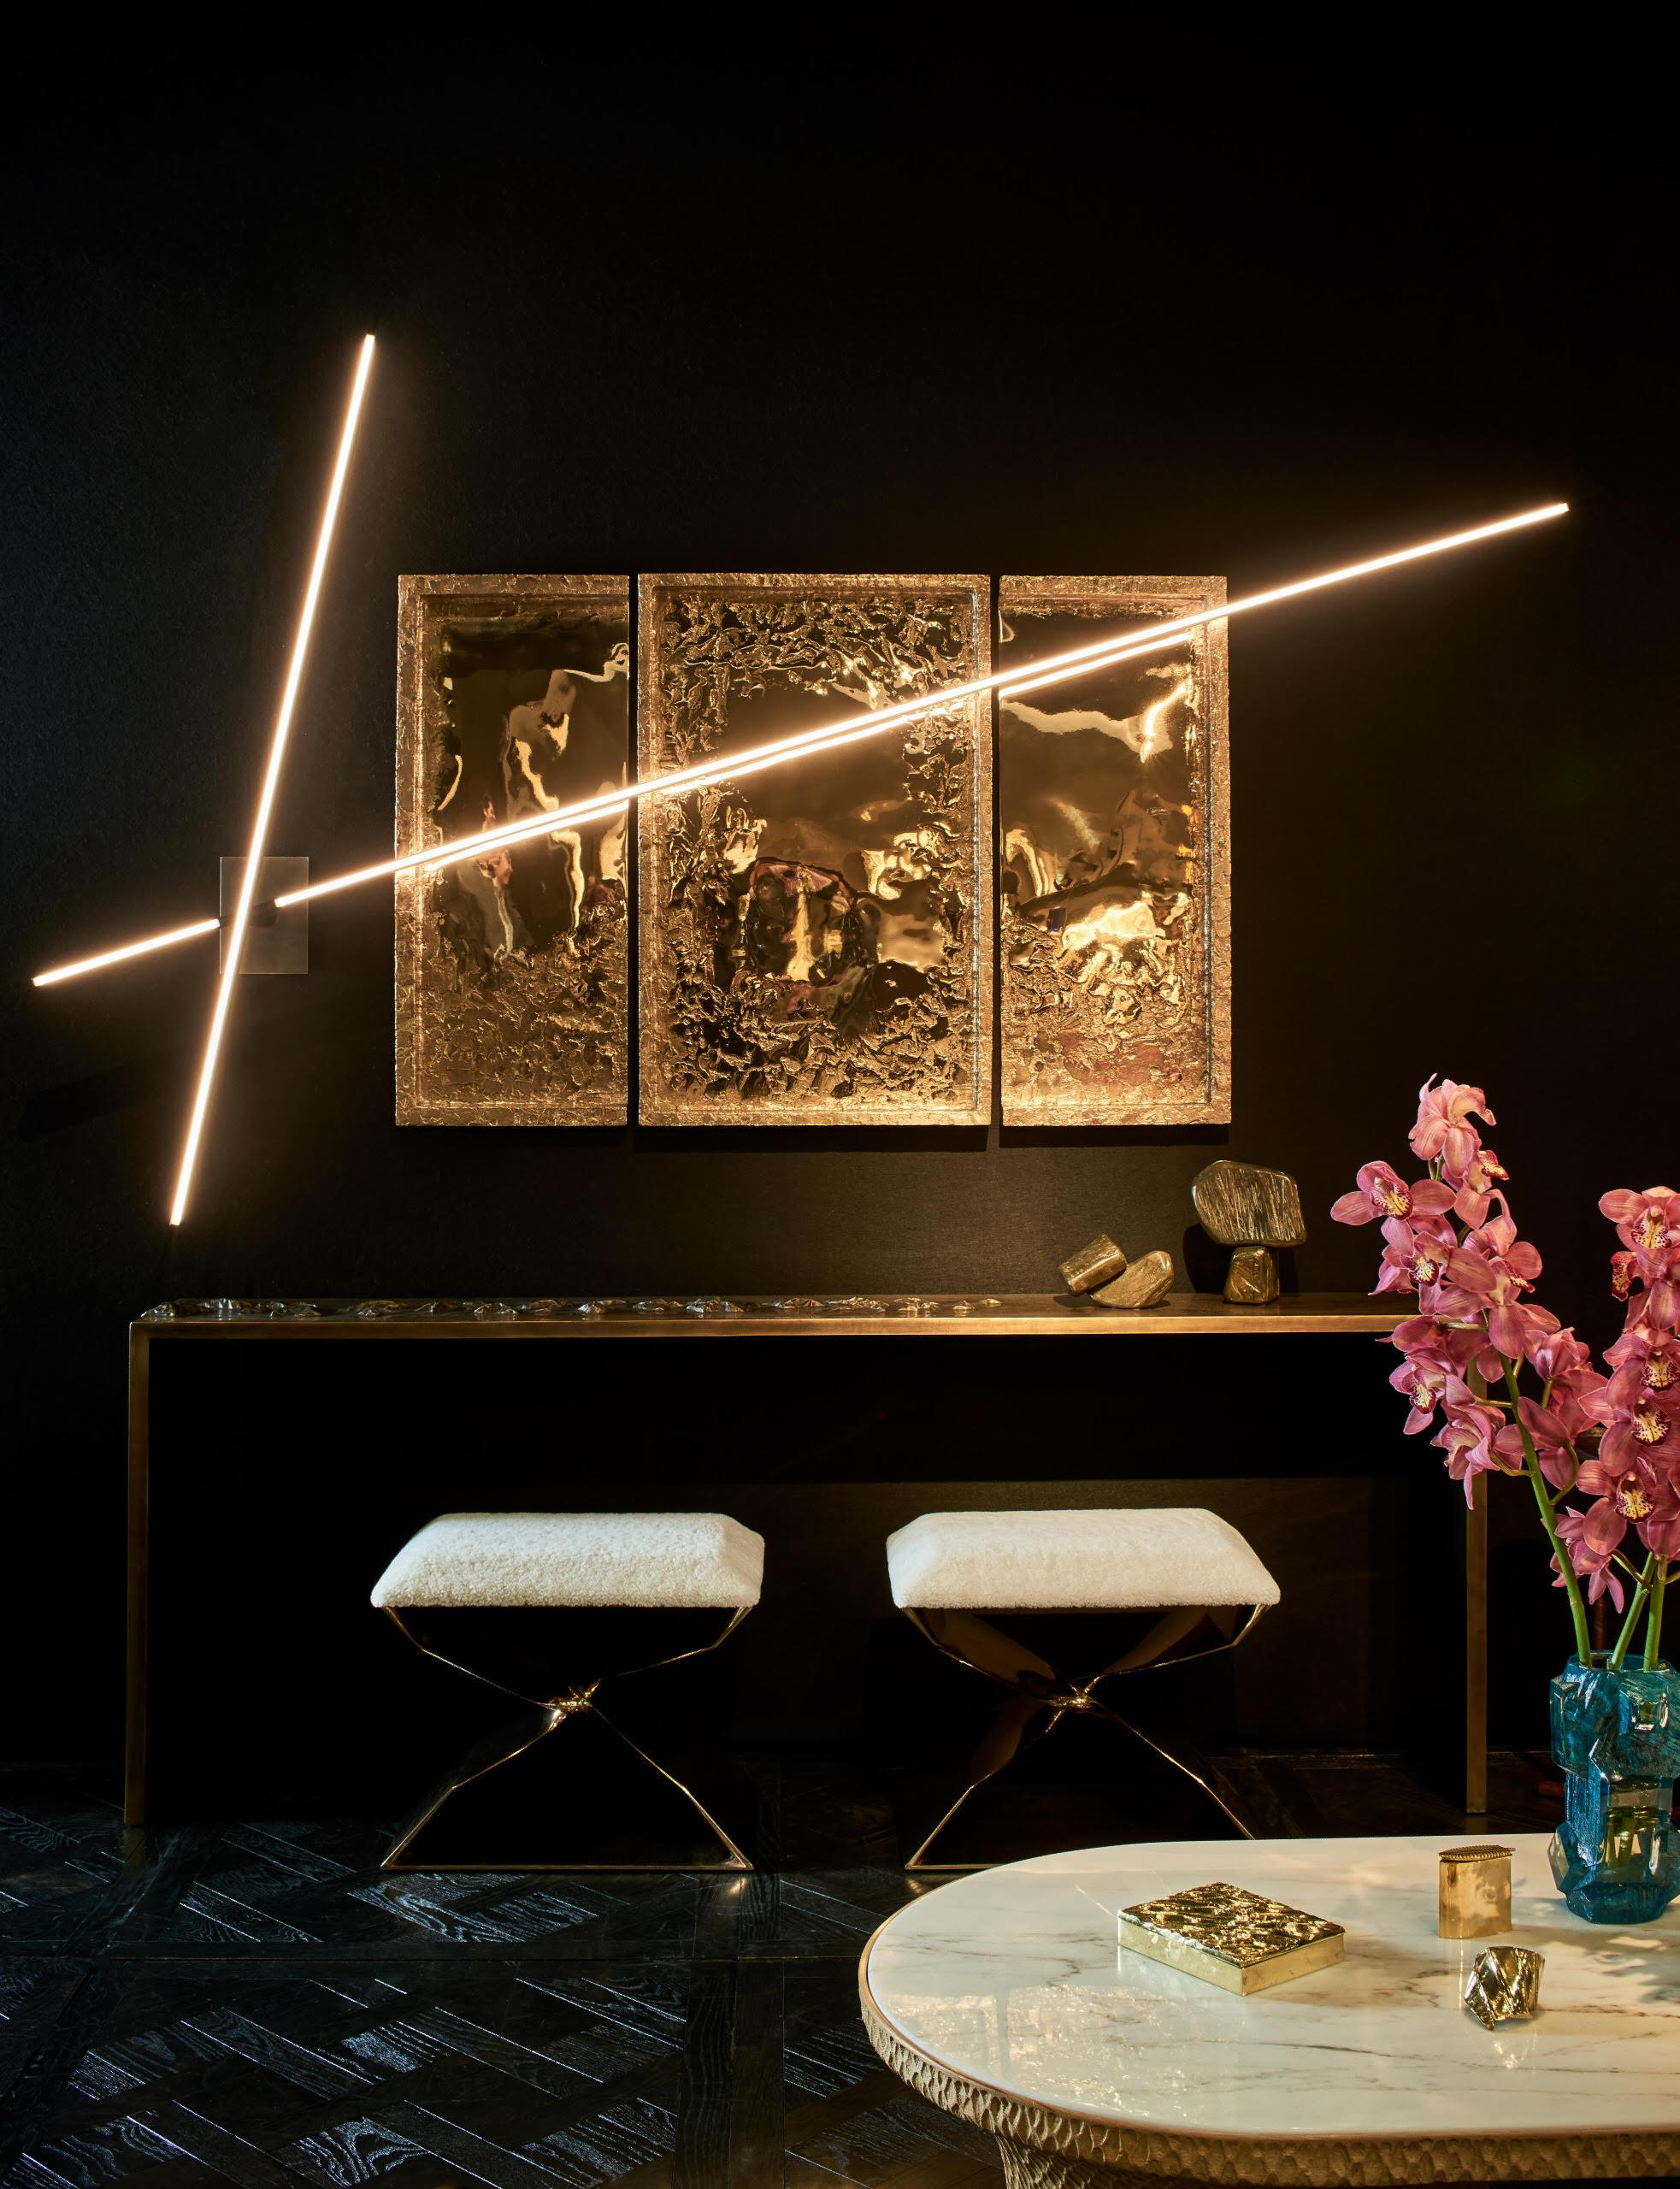 An ingenious sconce made of two intersecting wands of brushed bronze and glass encased LEDs, designed to rotate on a common axis. An impeccable work of industrial, functional beauty, the sconce serves as an excellent example of Fanning's deep